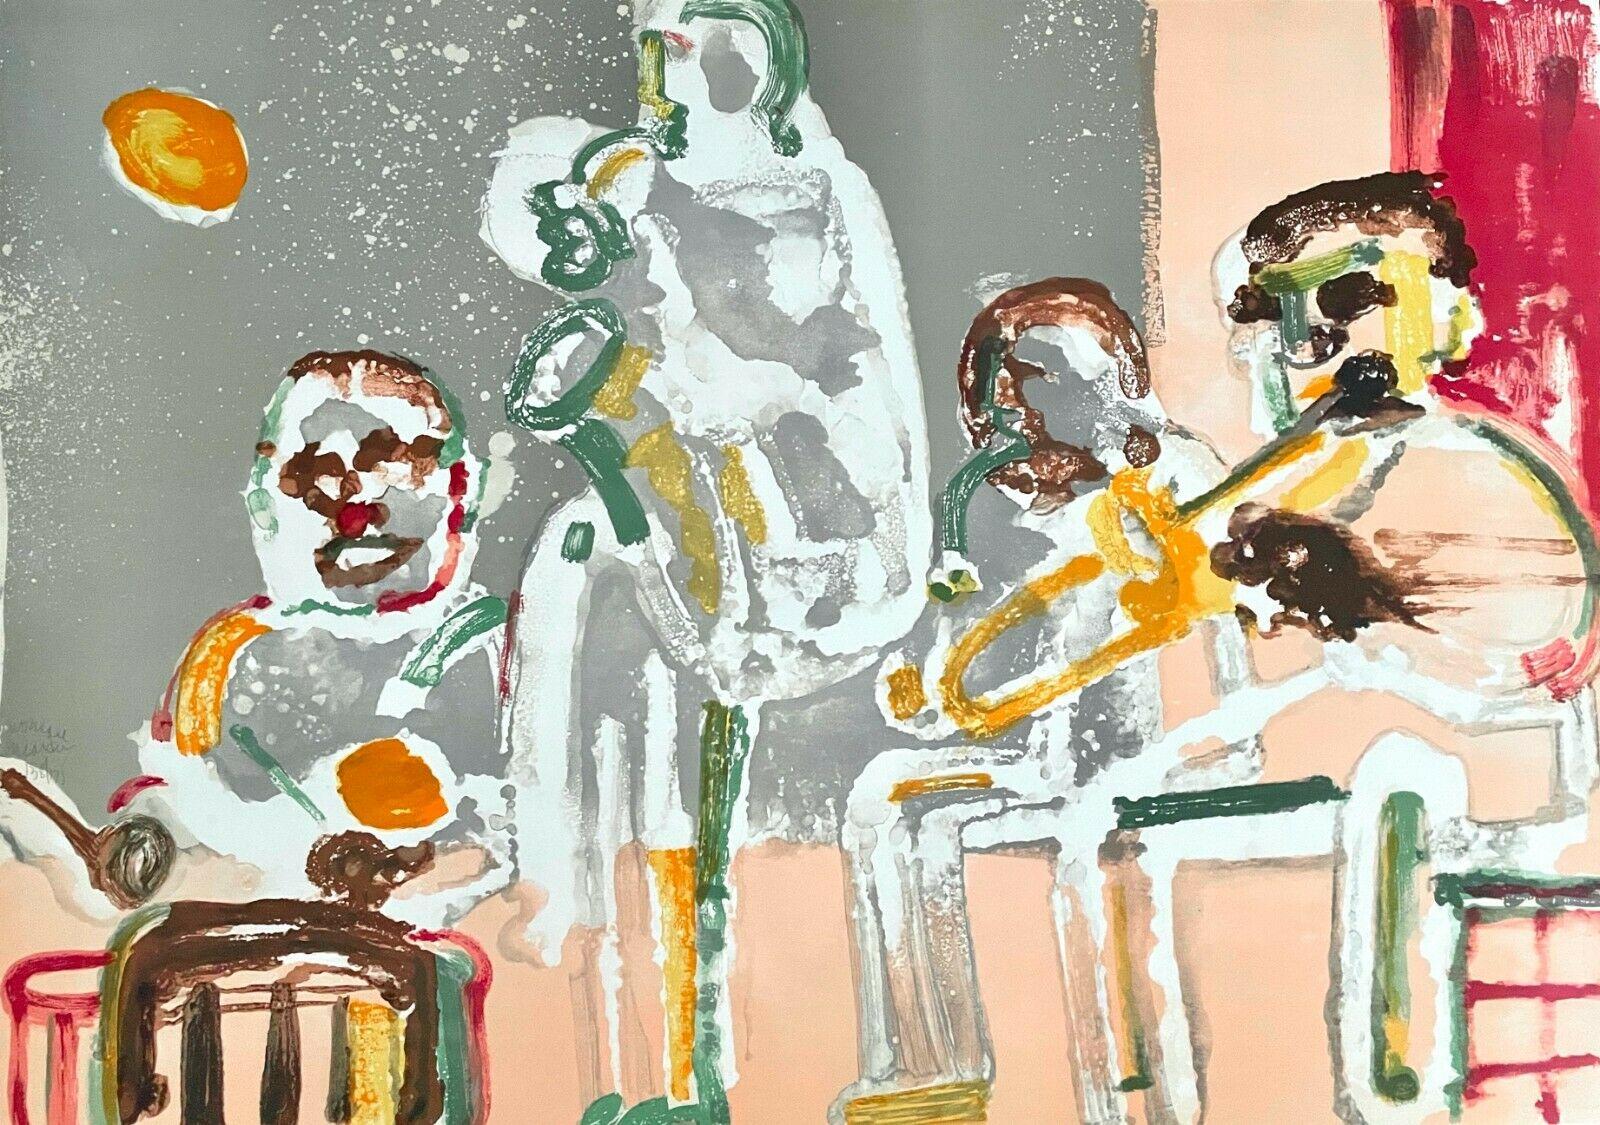 Artist: Romare Bearden (1911-1988)
Title: Tenor Sermon (Gelburd/Rosenberg 75)
Year: 1979
Medium: Lithograph on Arches paper
Edition: 101/175, plus proofs
Size: 24.75 x 34.75 inches
Condition: Excellent
Inscription: Signed and numbered by the